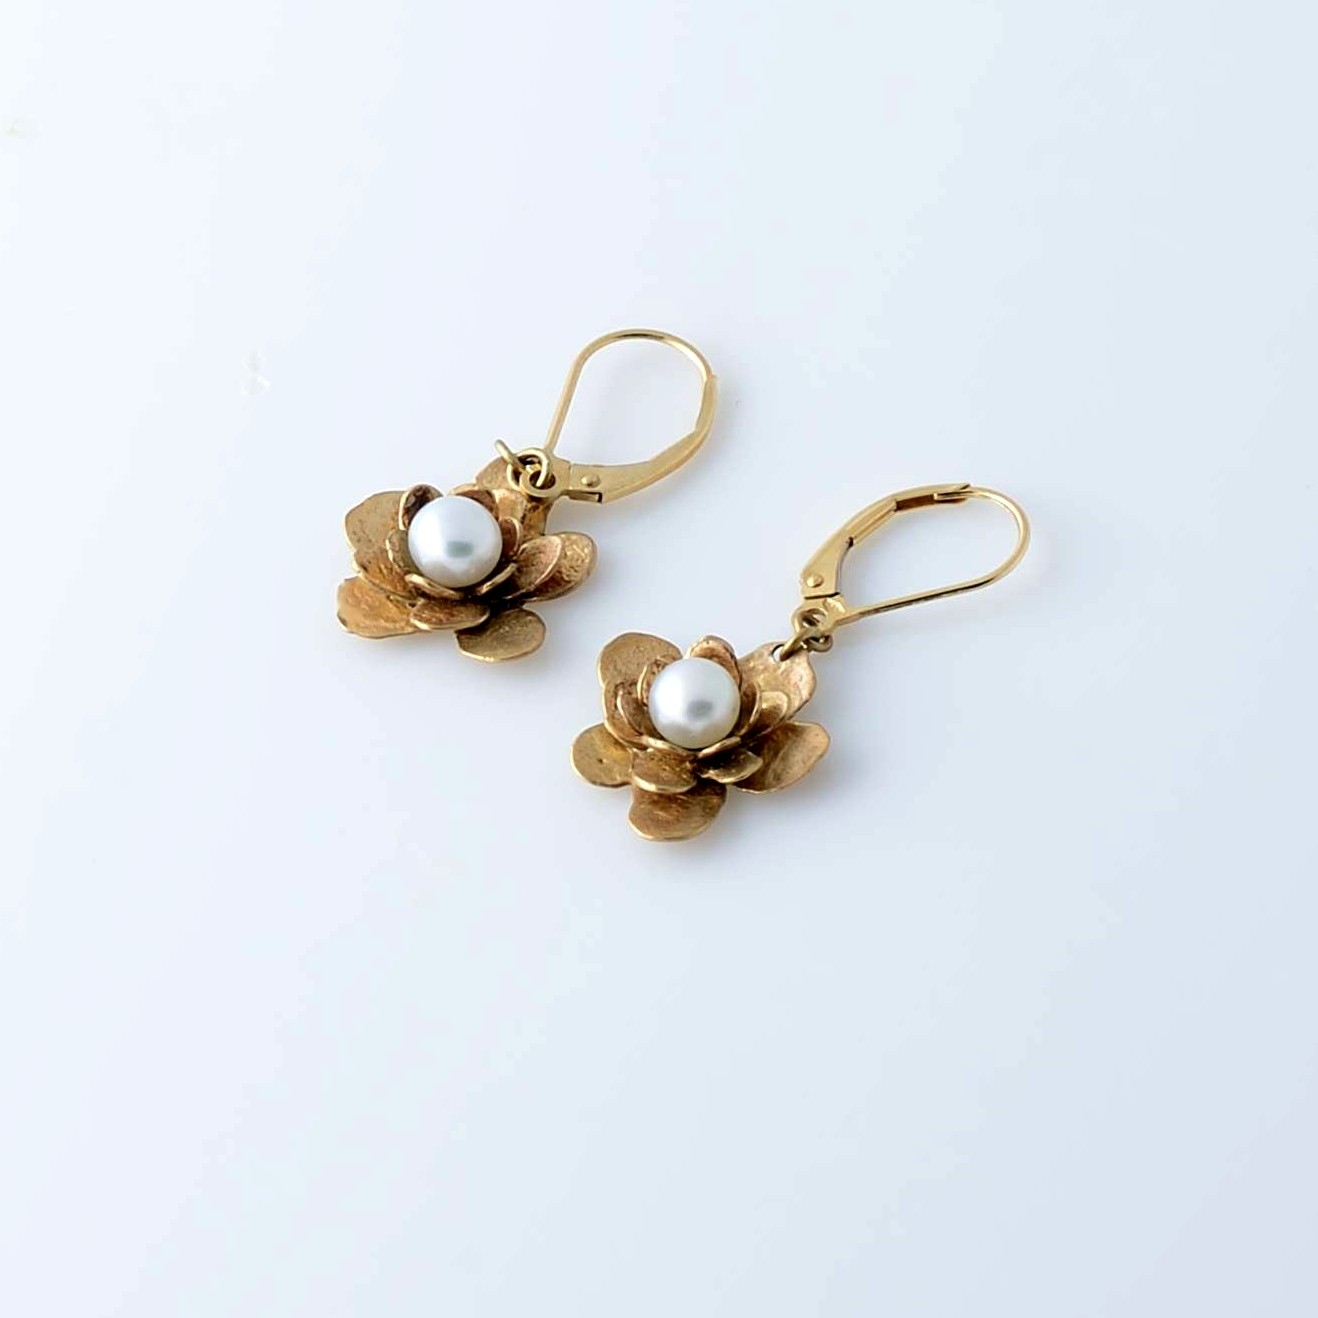 Gold earrings and pearl flower